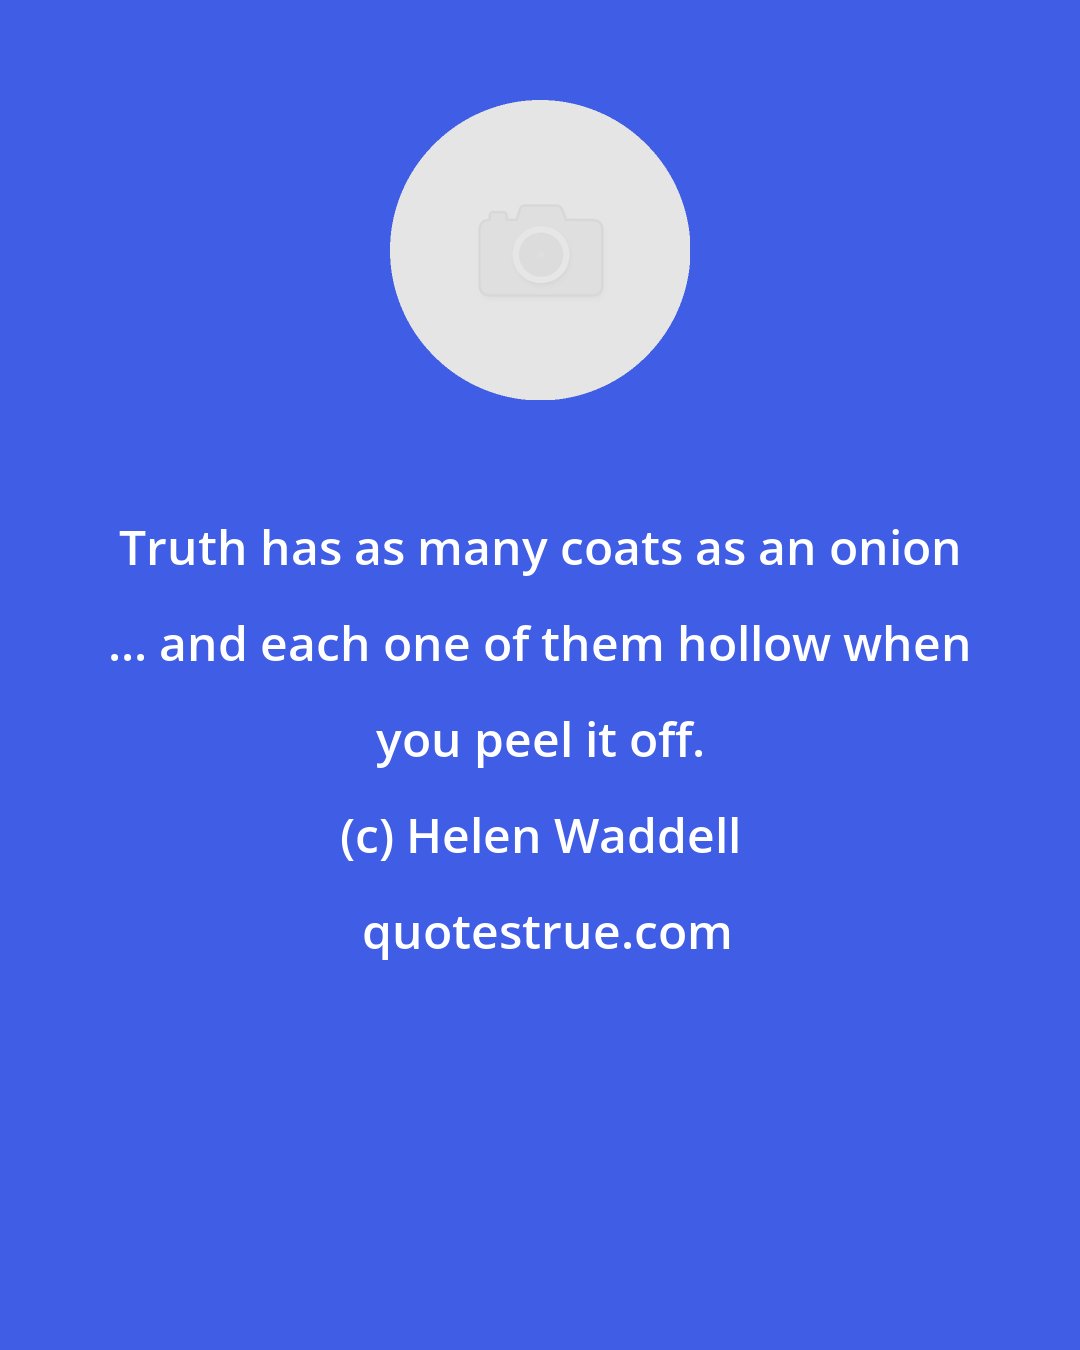 Helen Waddell: Truth has as many coats as an onion ... and each one of them hollow when you peel it off.